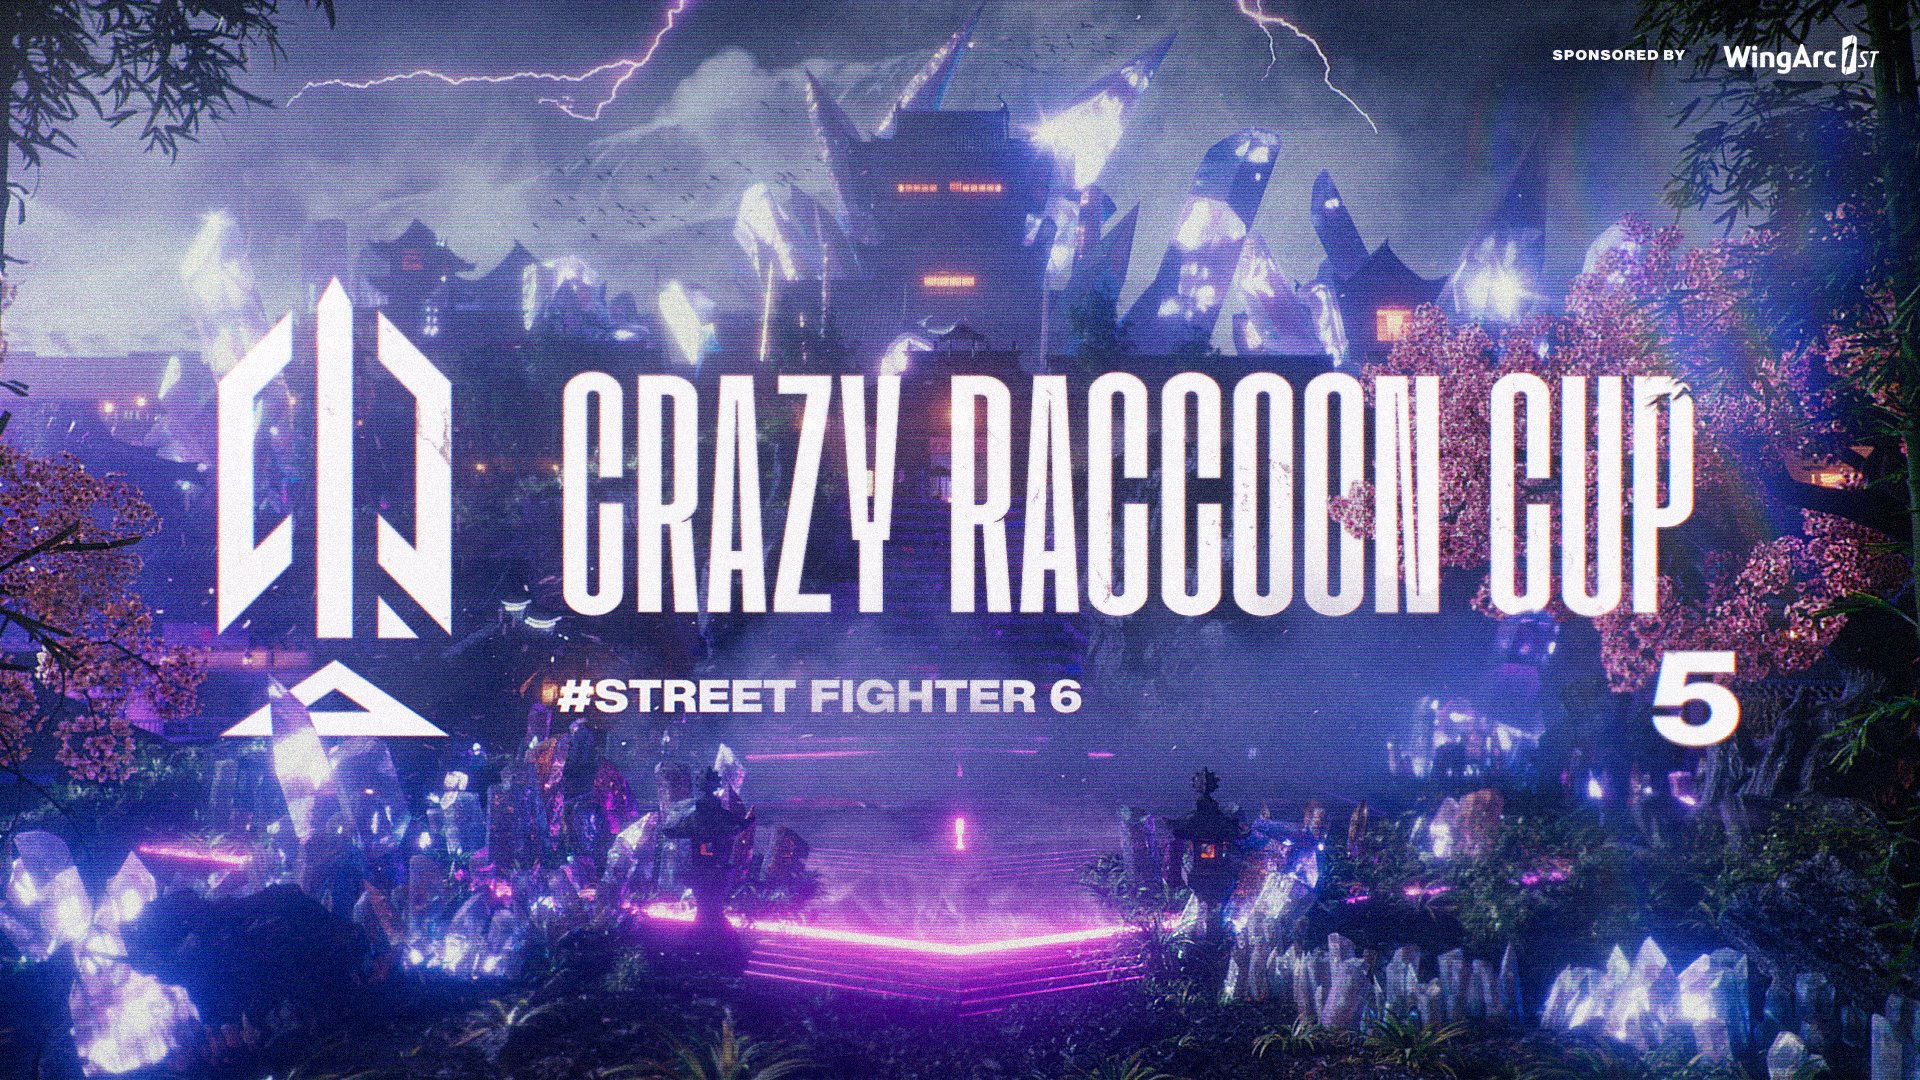 Crazy Raccoon Cup Street Fight